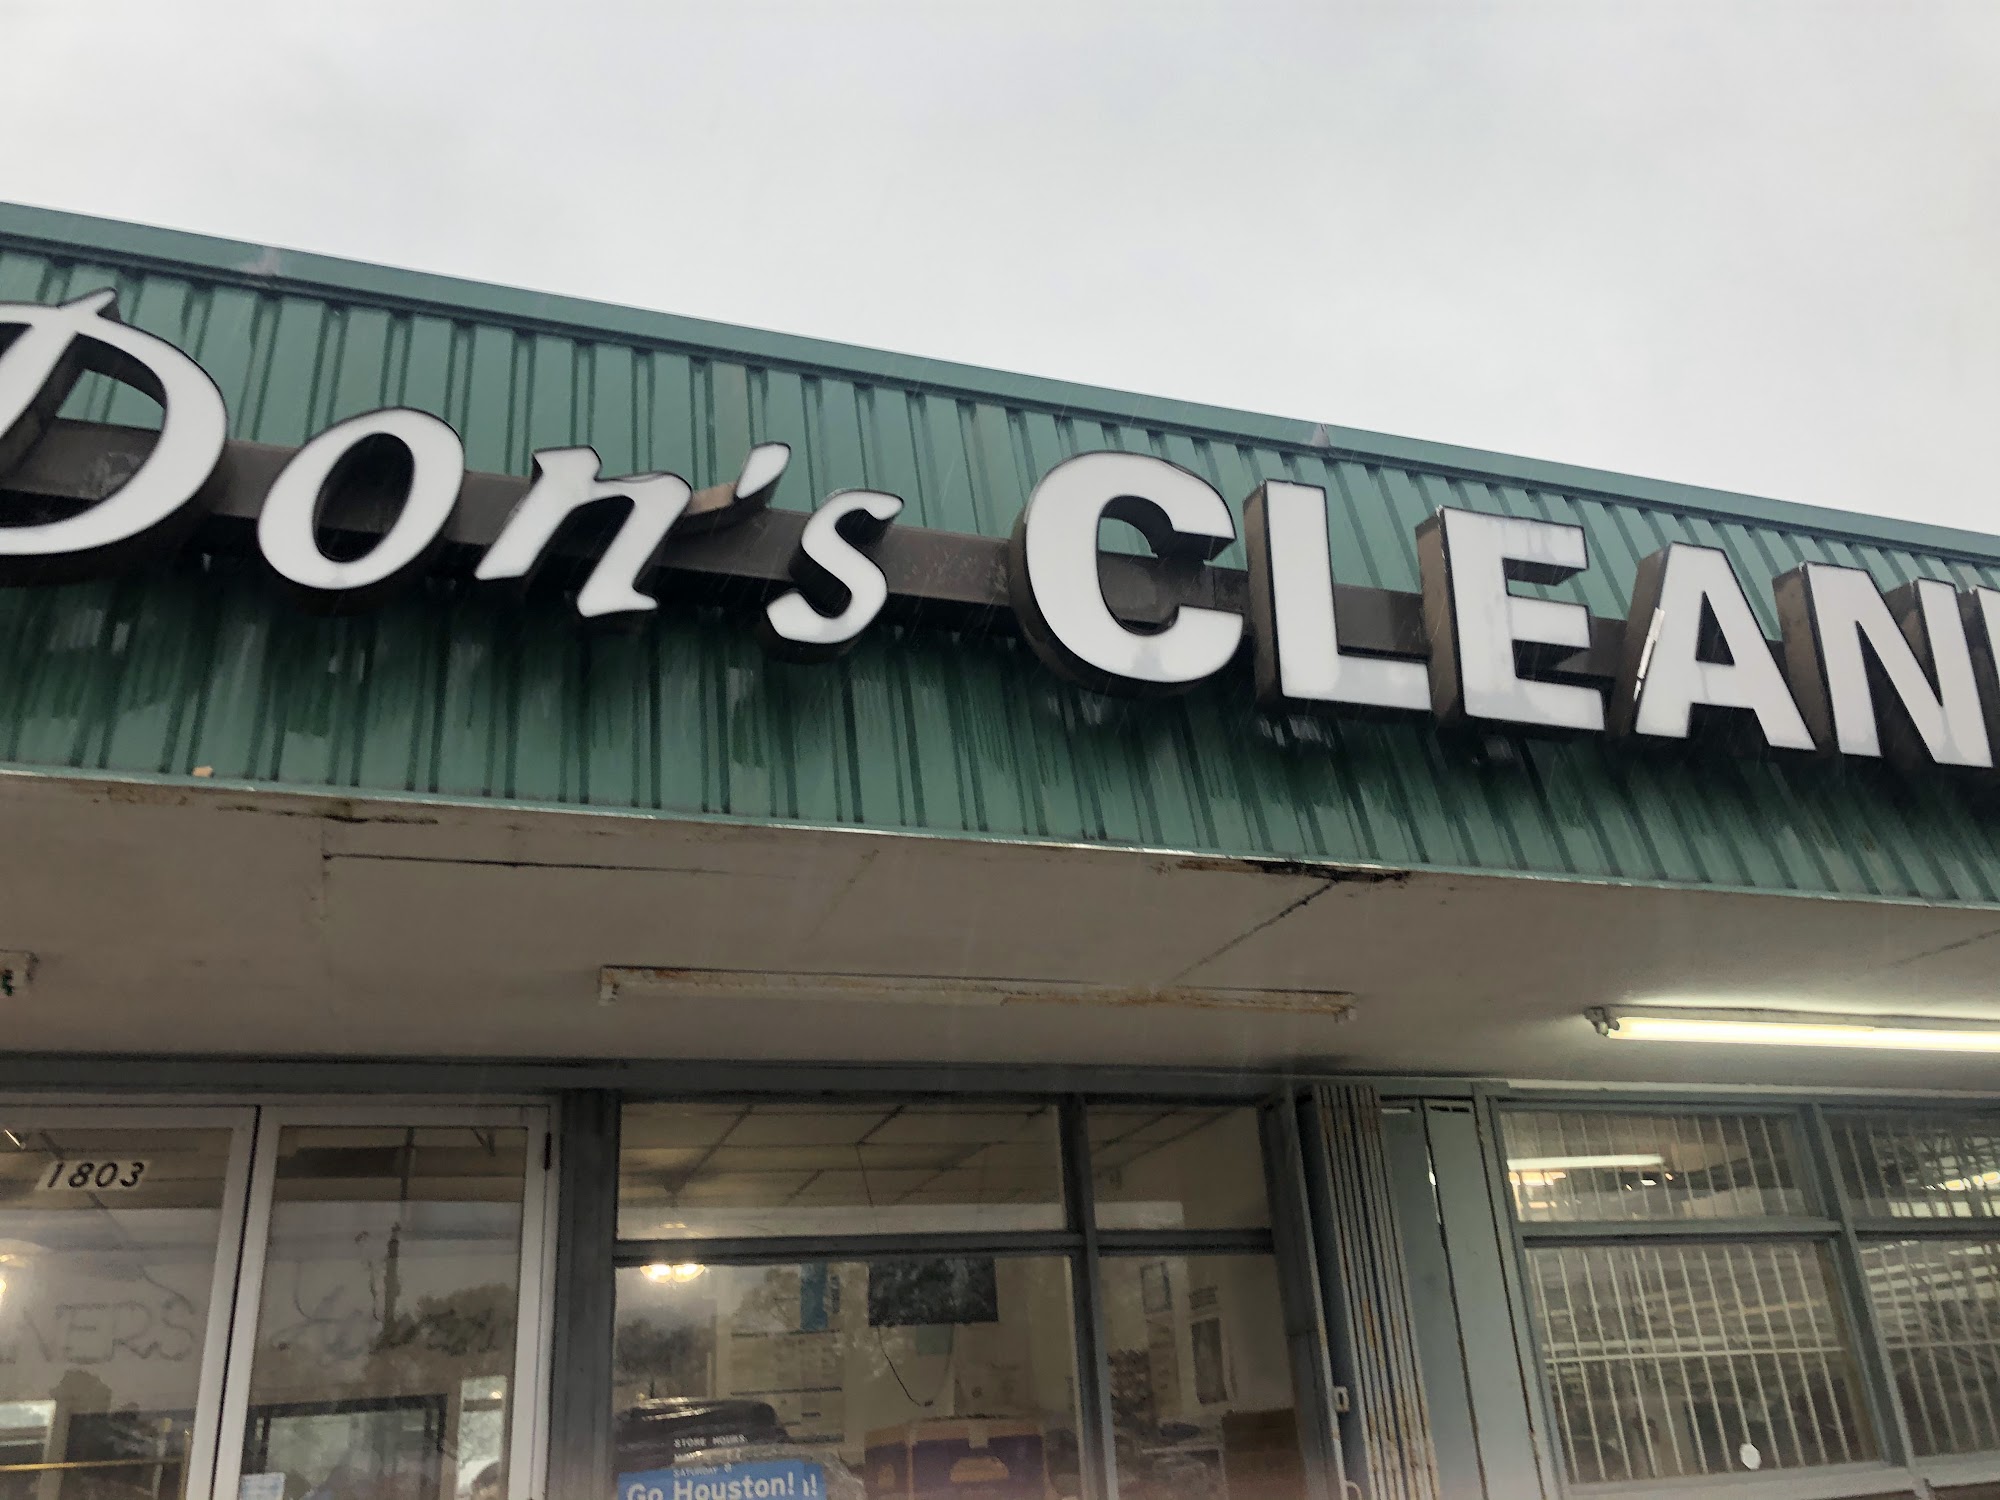 Don's Cleaners